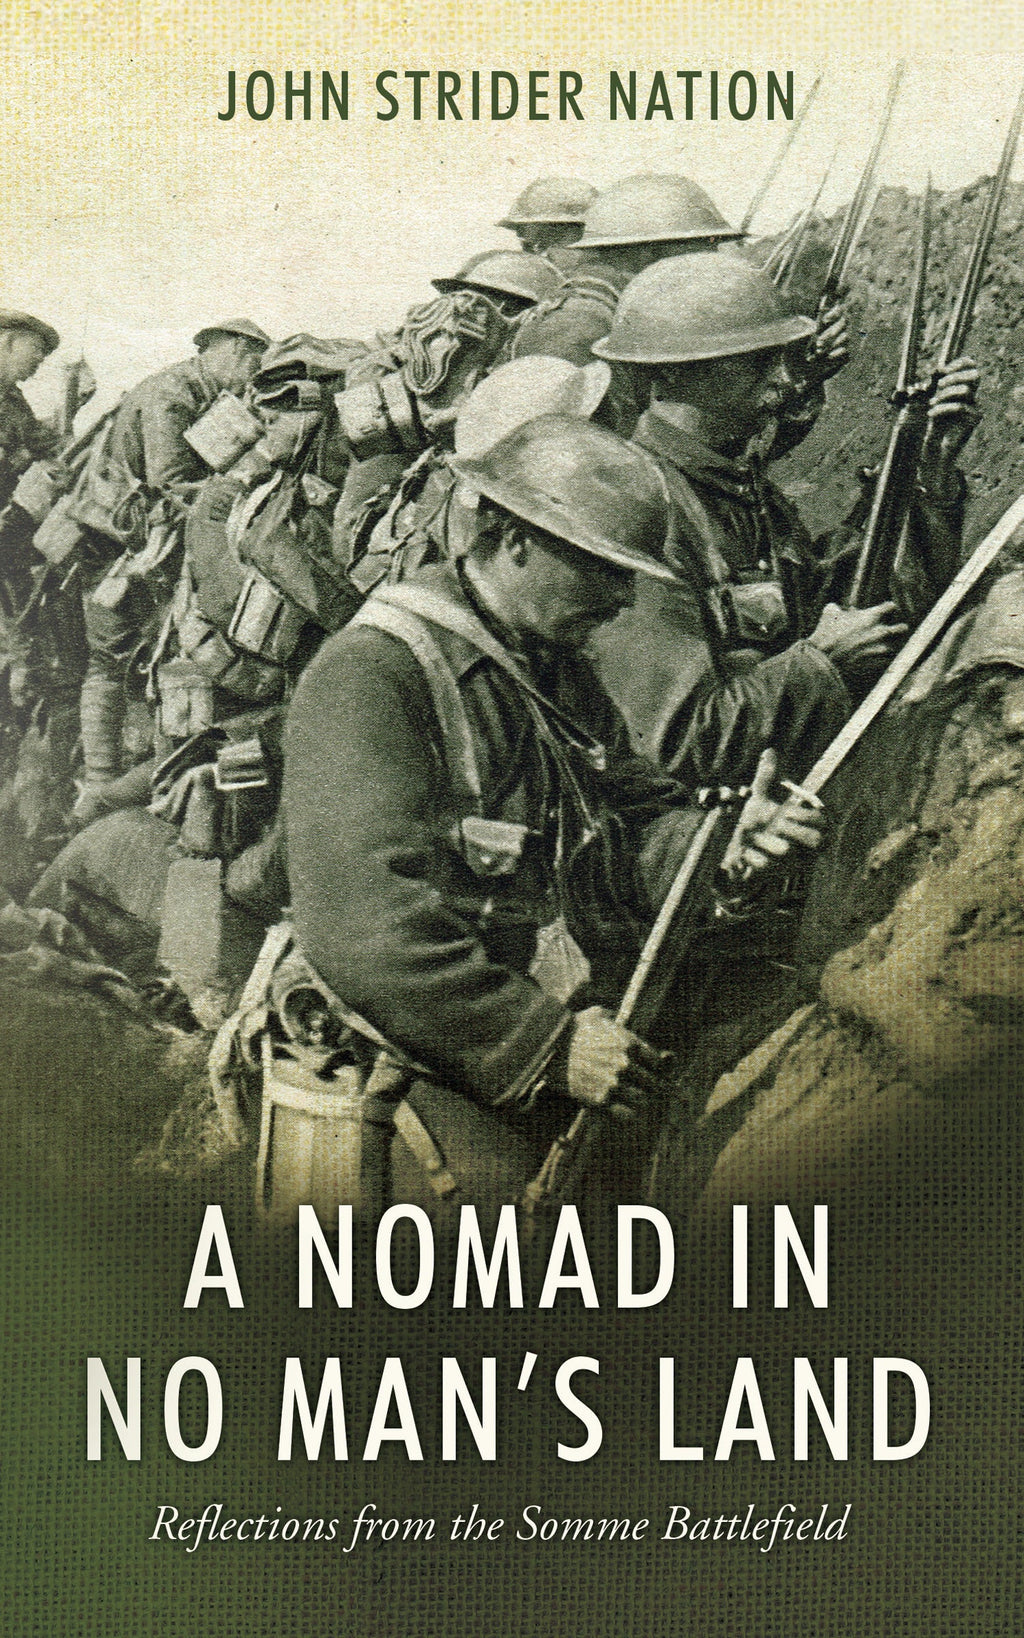 A Nomad in No Man's Land: Reflections from the Somme Battlefield